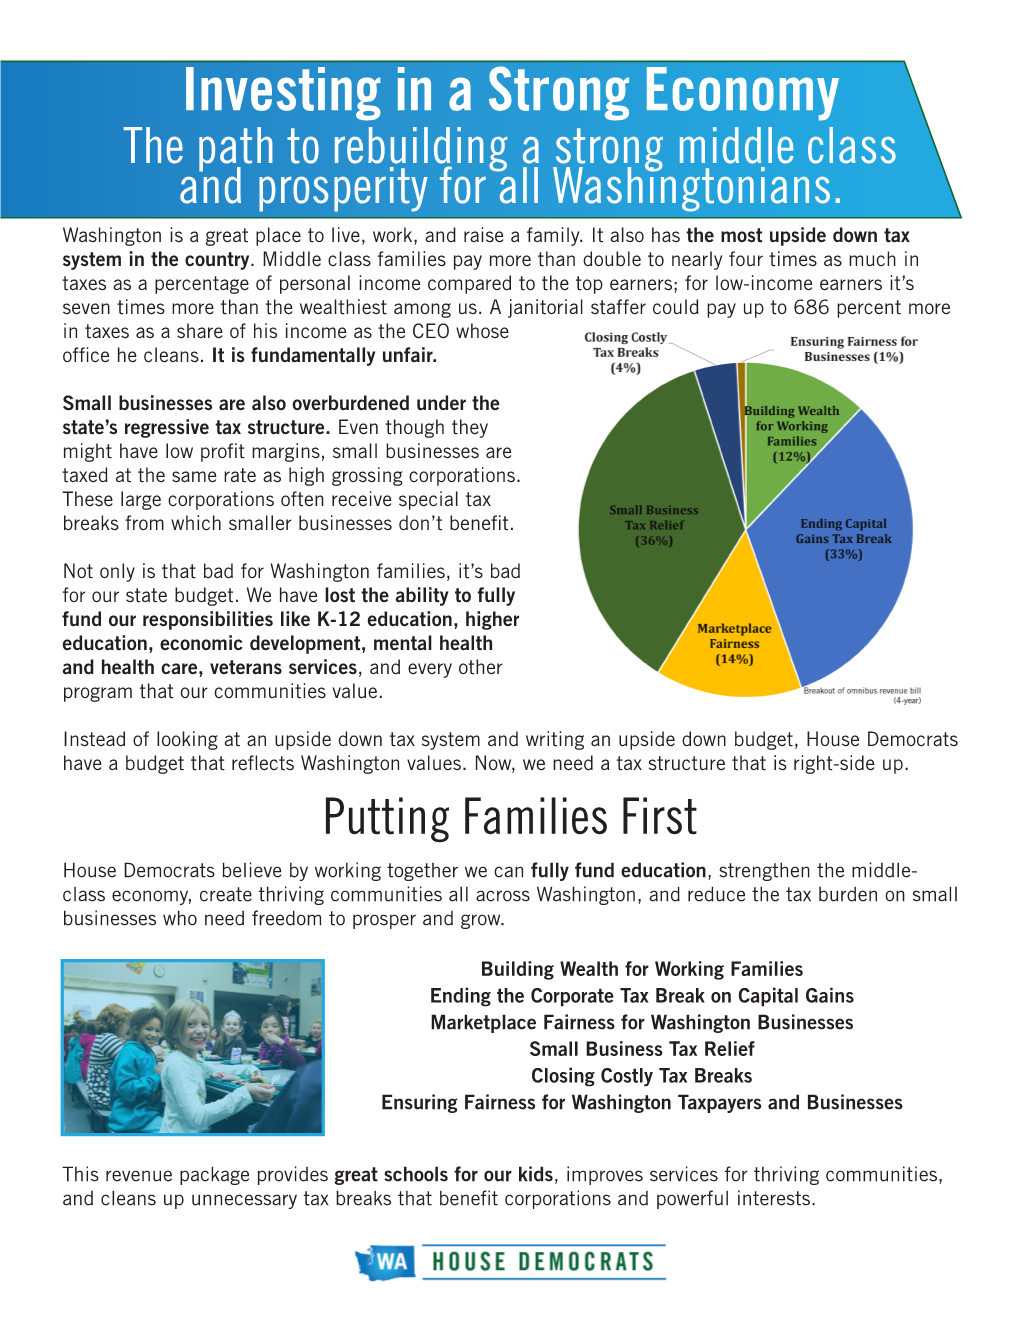 Investing in a Strong Economy the Path to Rebuilding a Strong Middle Class and Prosperity for All Washingtonians